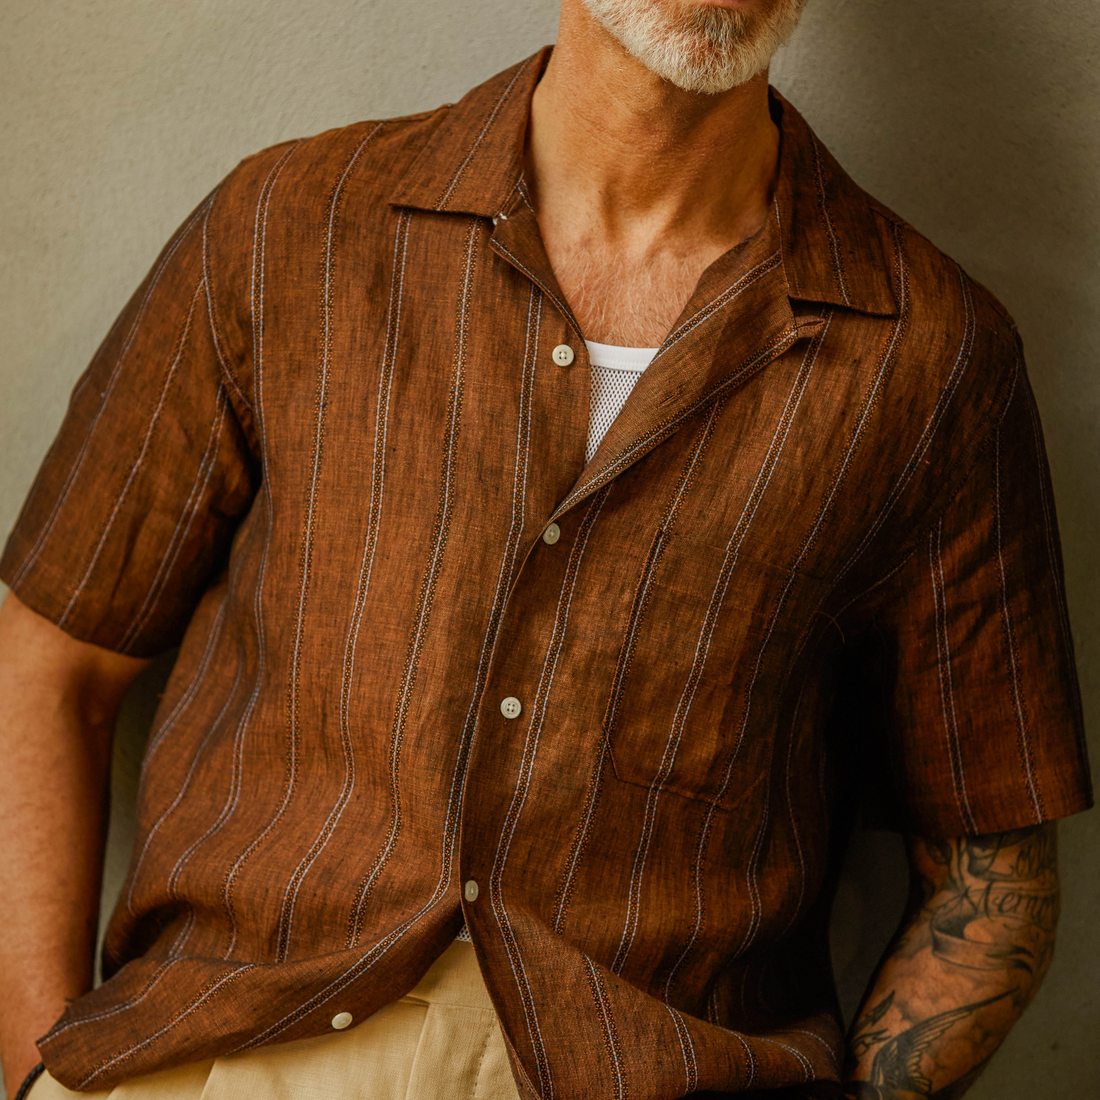 An older man with tattoos on his arms wearing a striped brown shirt and beige pants, cropped at the mid-chest.